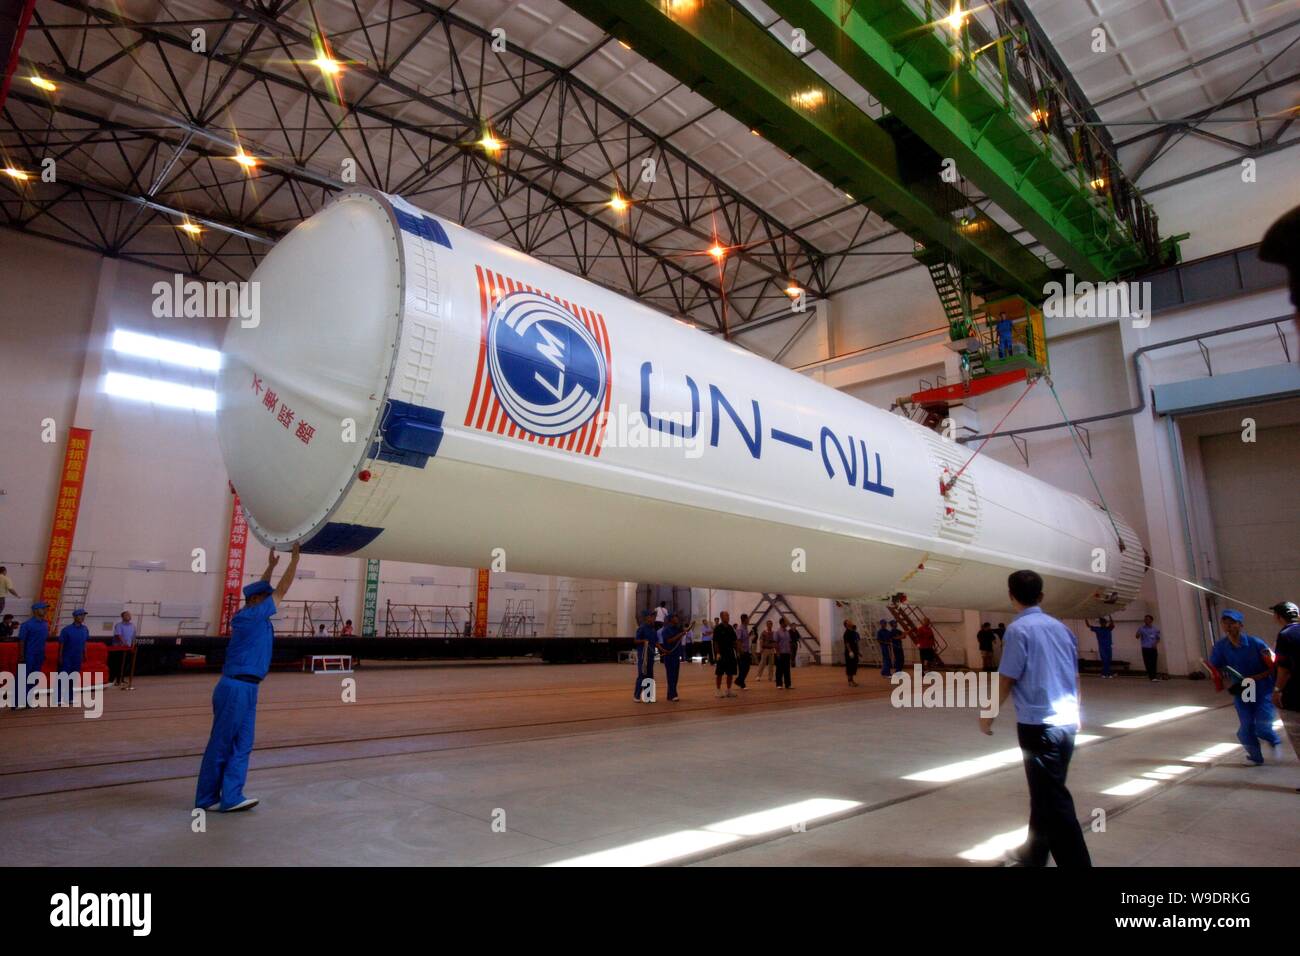 Chinese aeronautical scientists unload the first stage of a Long March 2F (CZ-2F) rocket during the preparation for the Shenzhou VII manned spacefligh Stock Photo